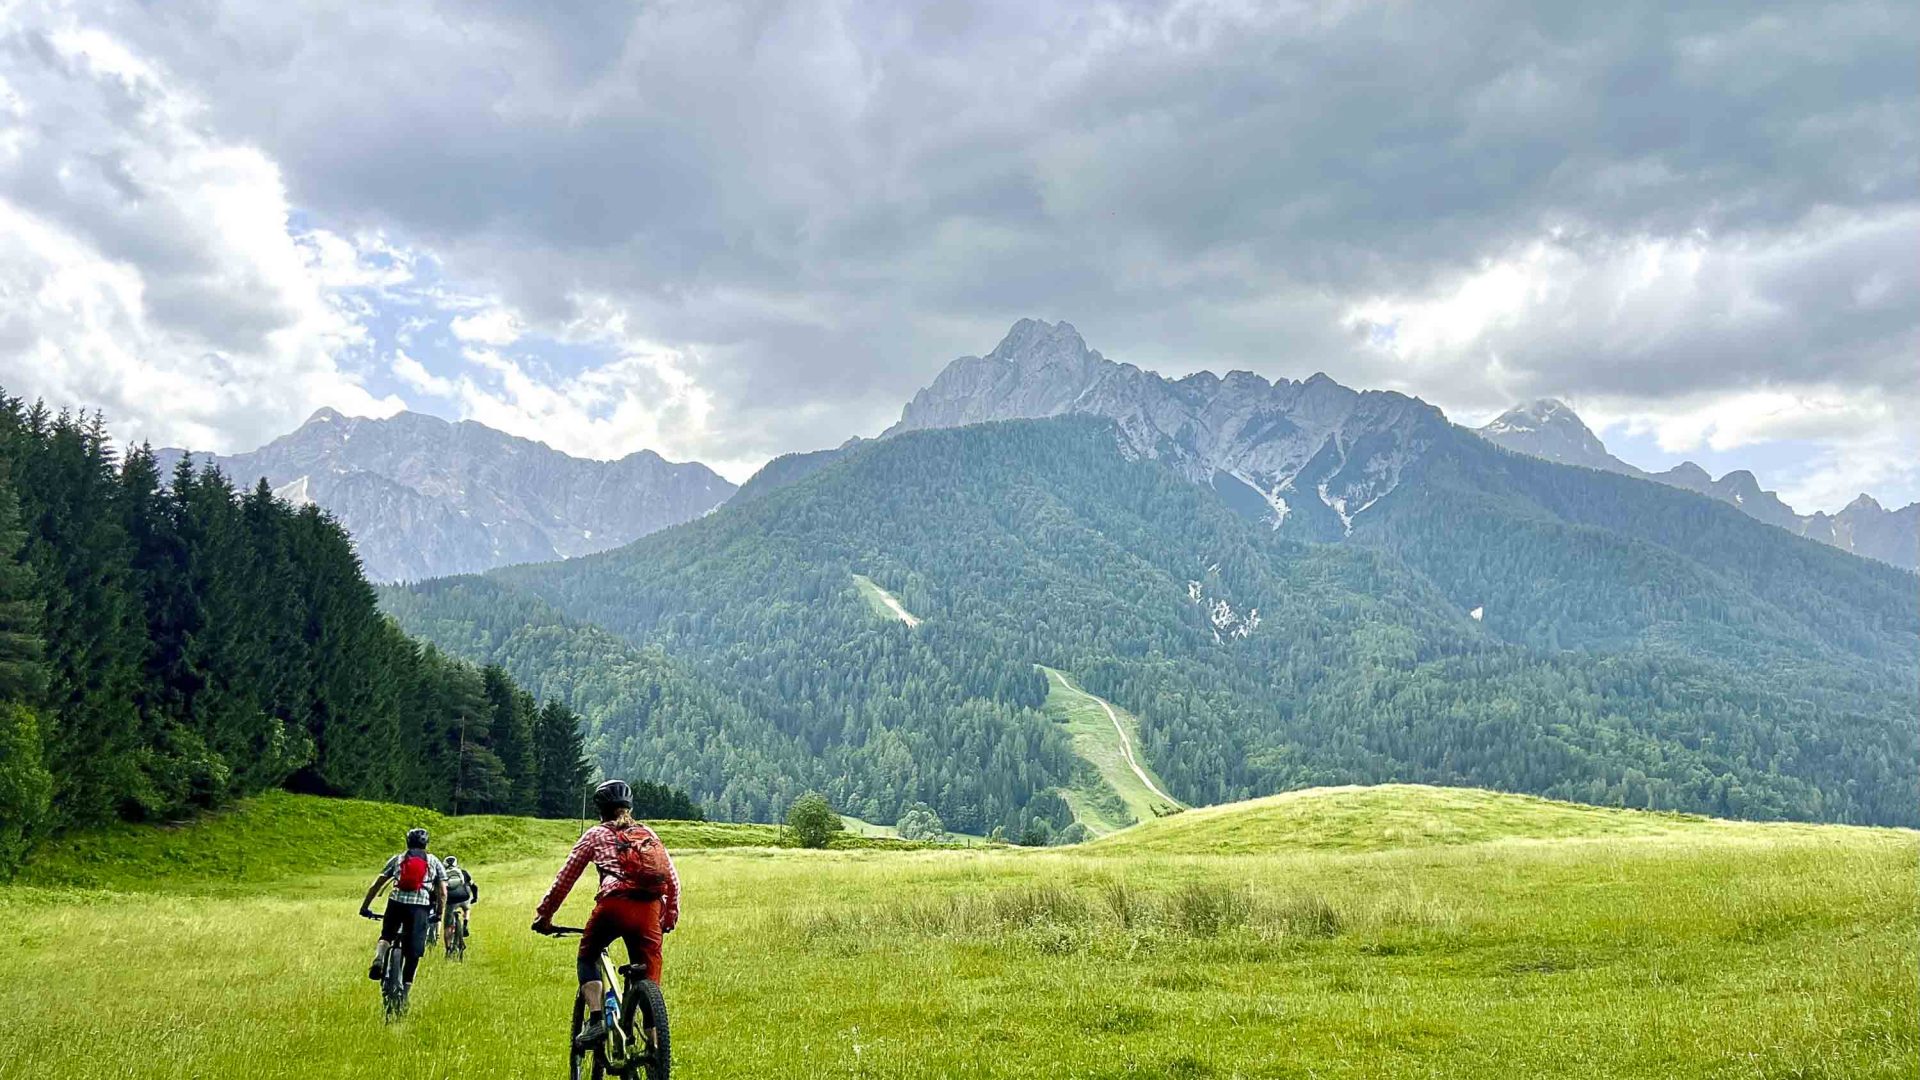 Bike riders on green pastures ride toward tall mountains.